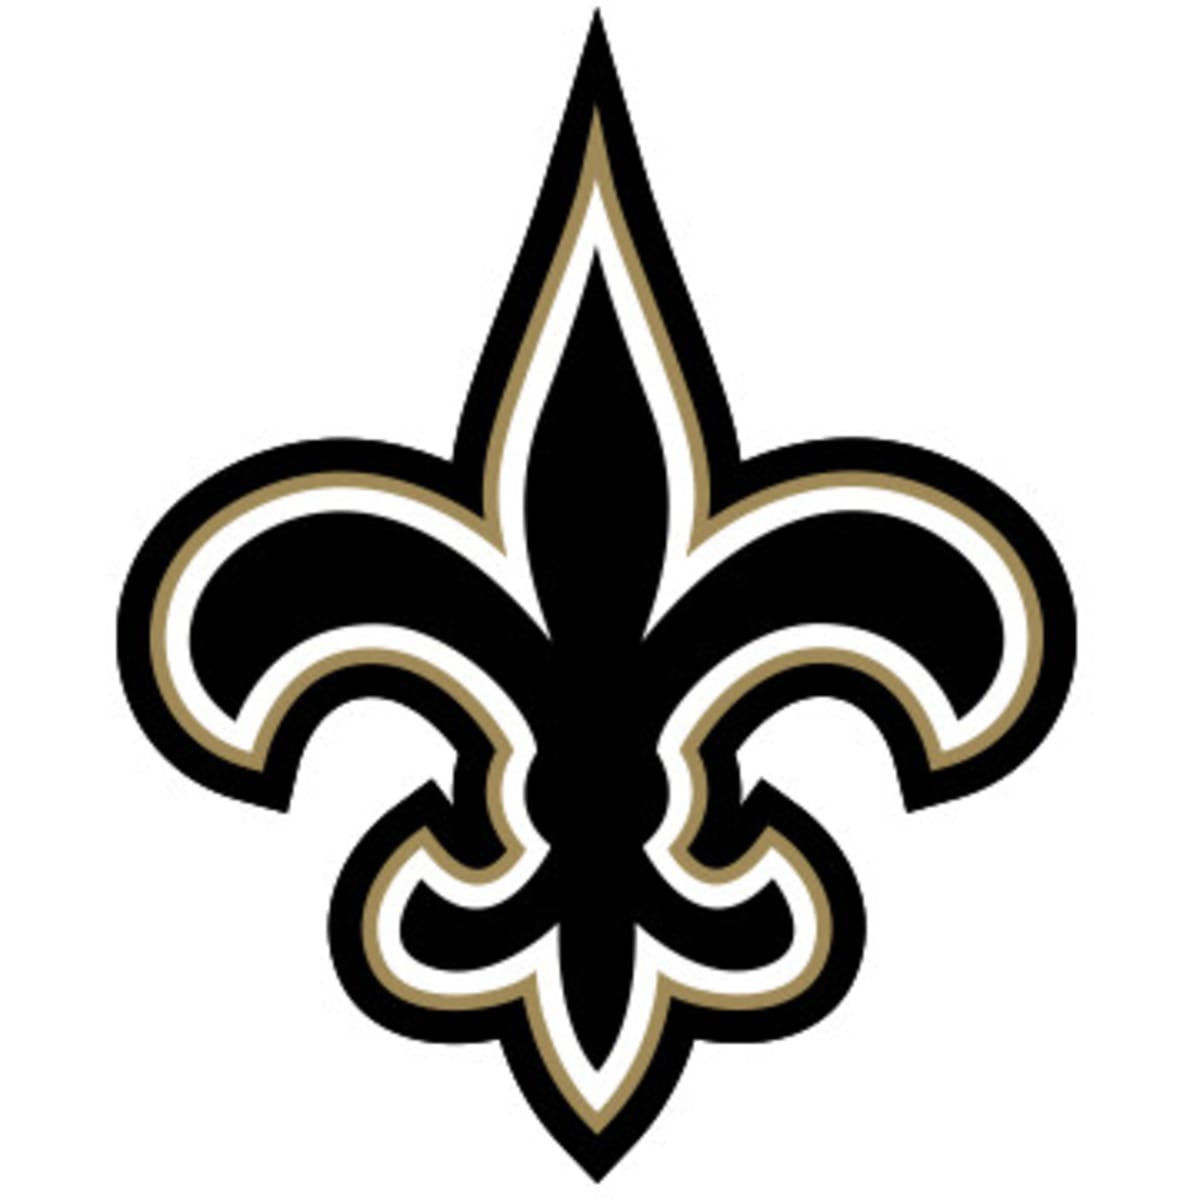 Saints Preseason TV Schedule Announced - Sports Illustrated New Orleans  Saints News, Analysis and More